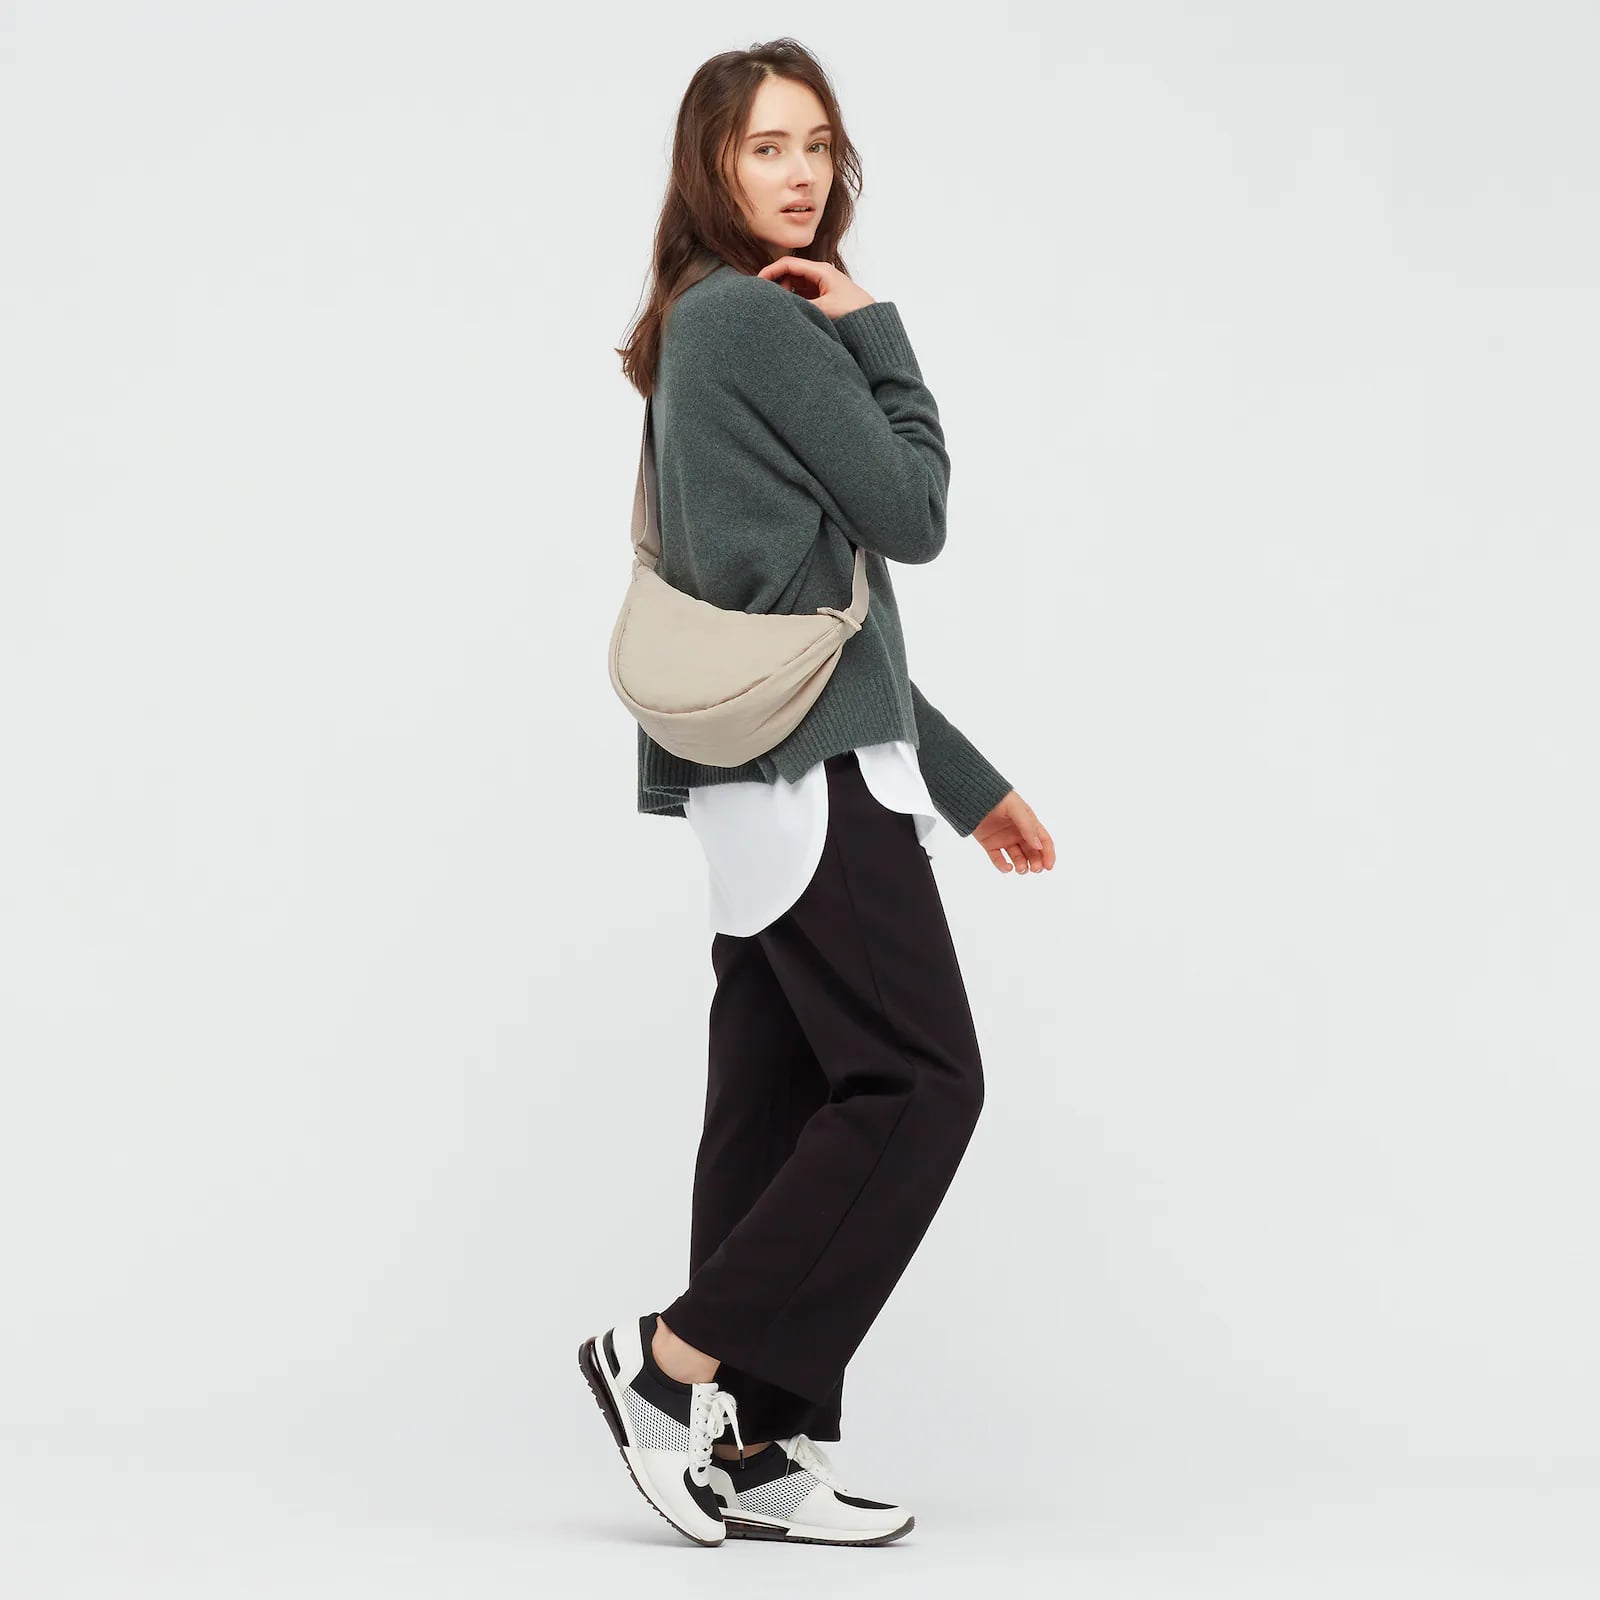 This $20 TikTok-Approved Uniqlo Bag Is the Ultimate Fall Accessory